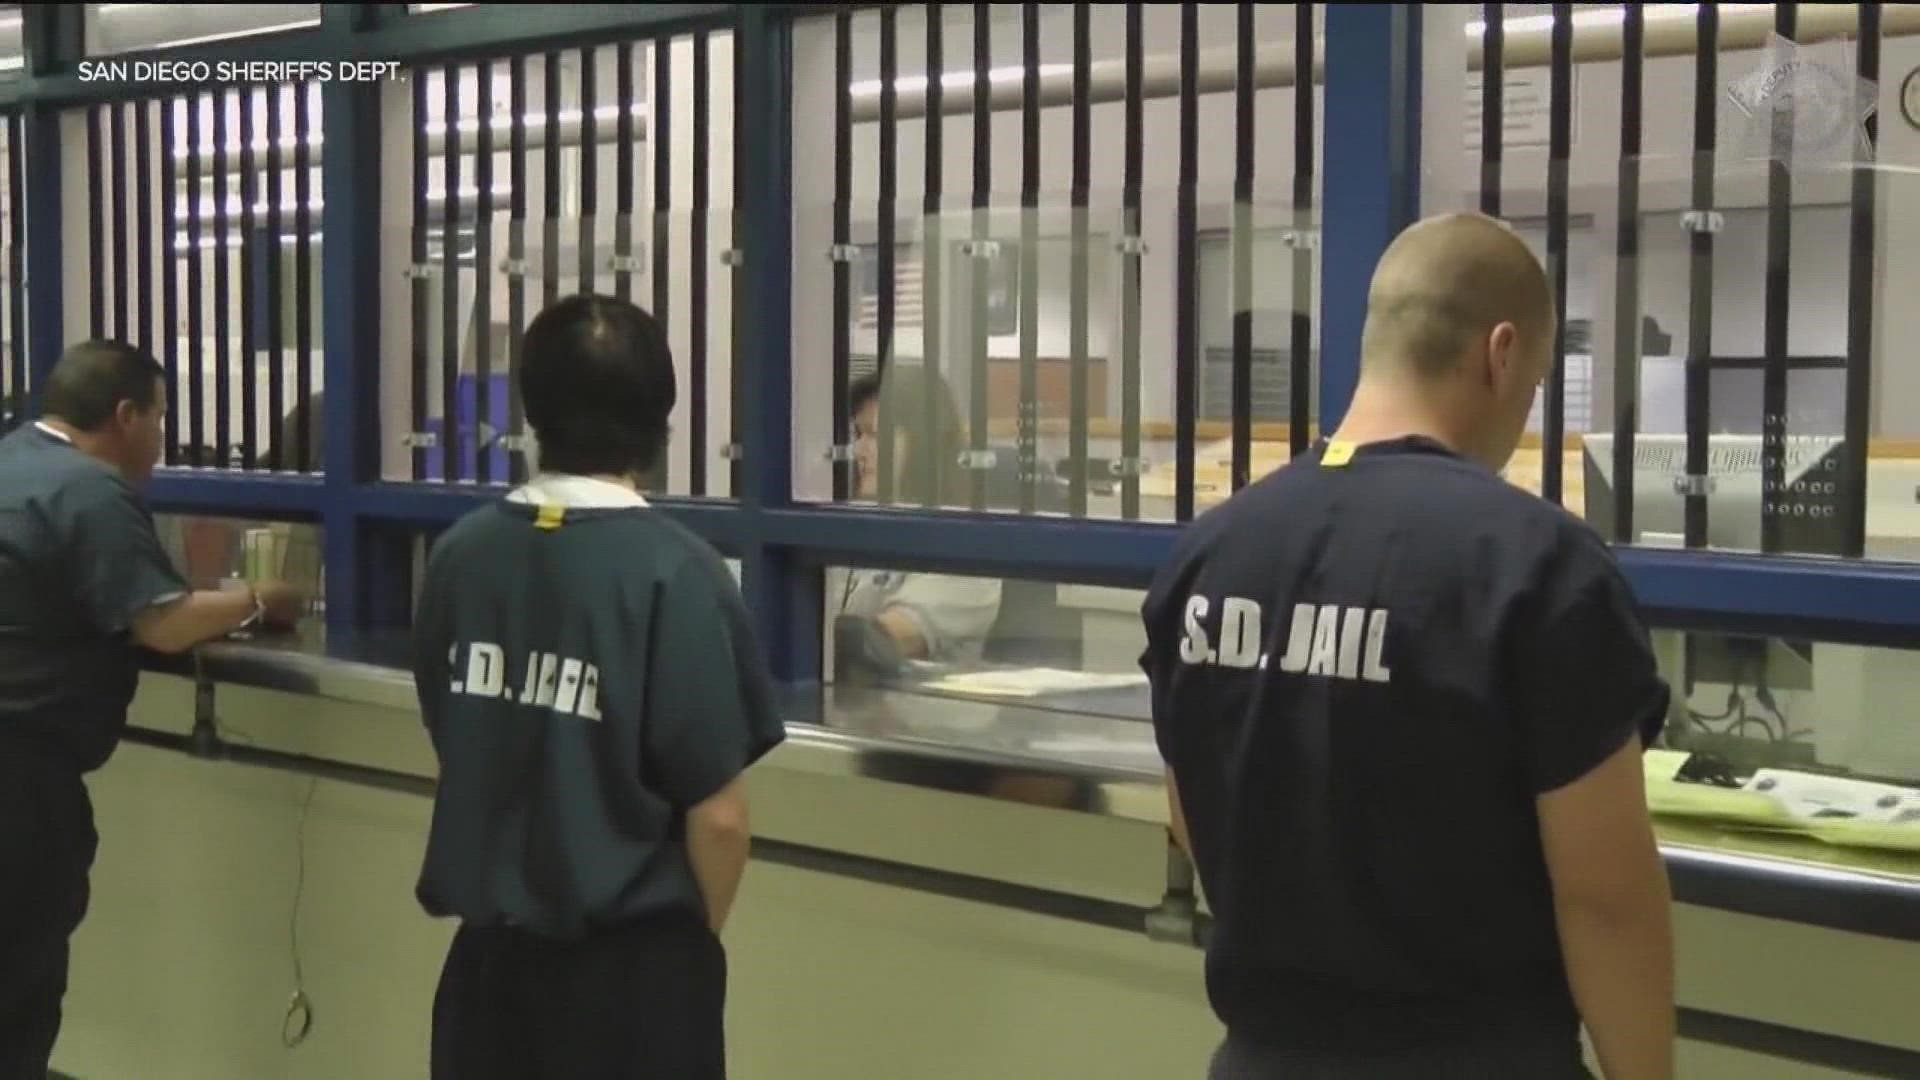 The San Diego Sheriff's Department change how they medically screen inmates into the jail system.